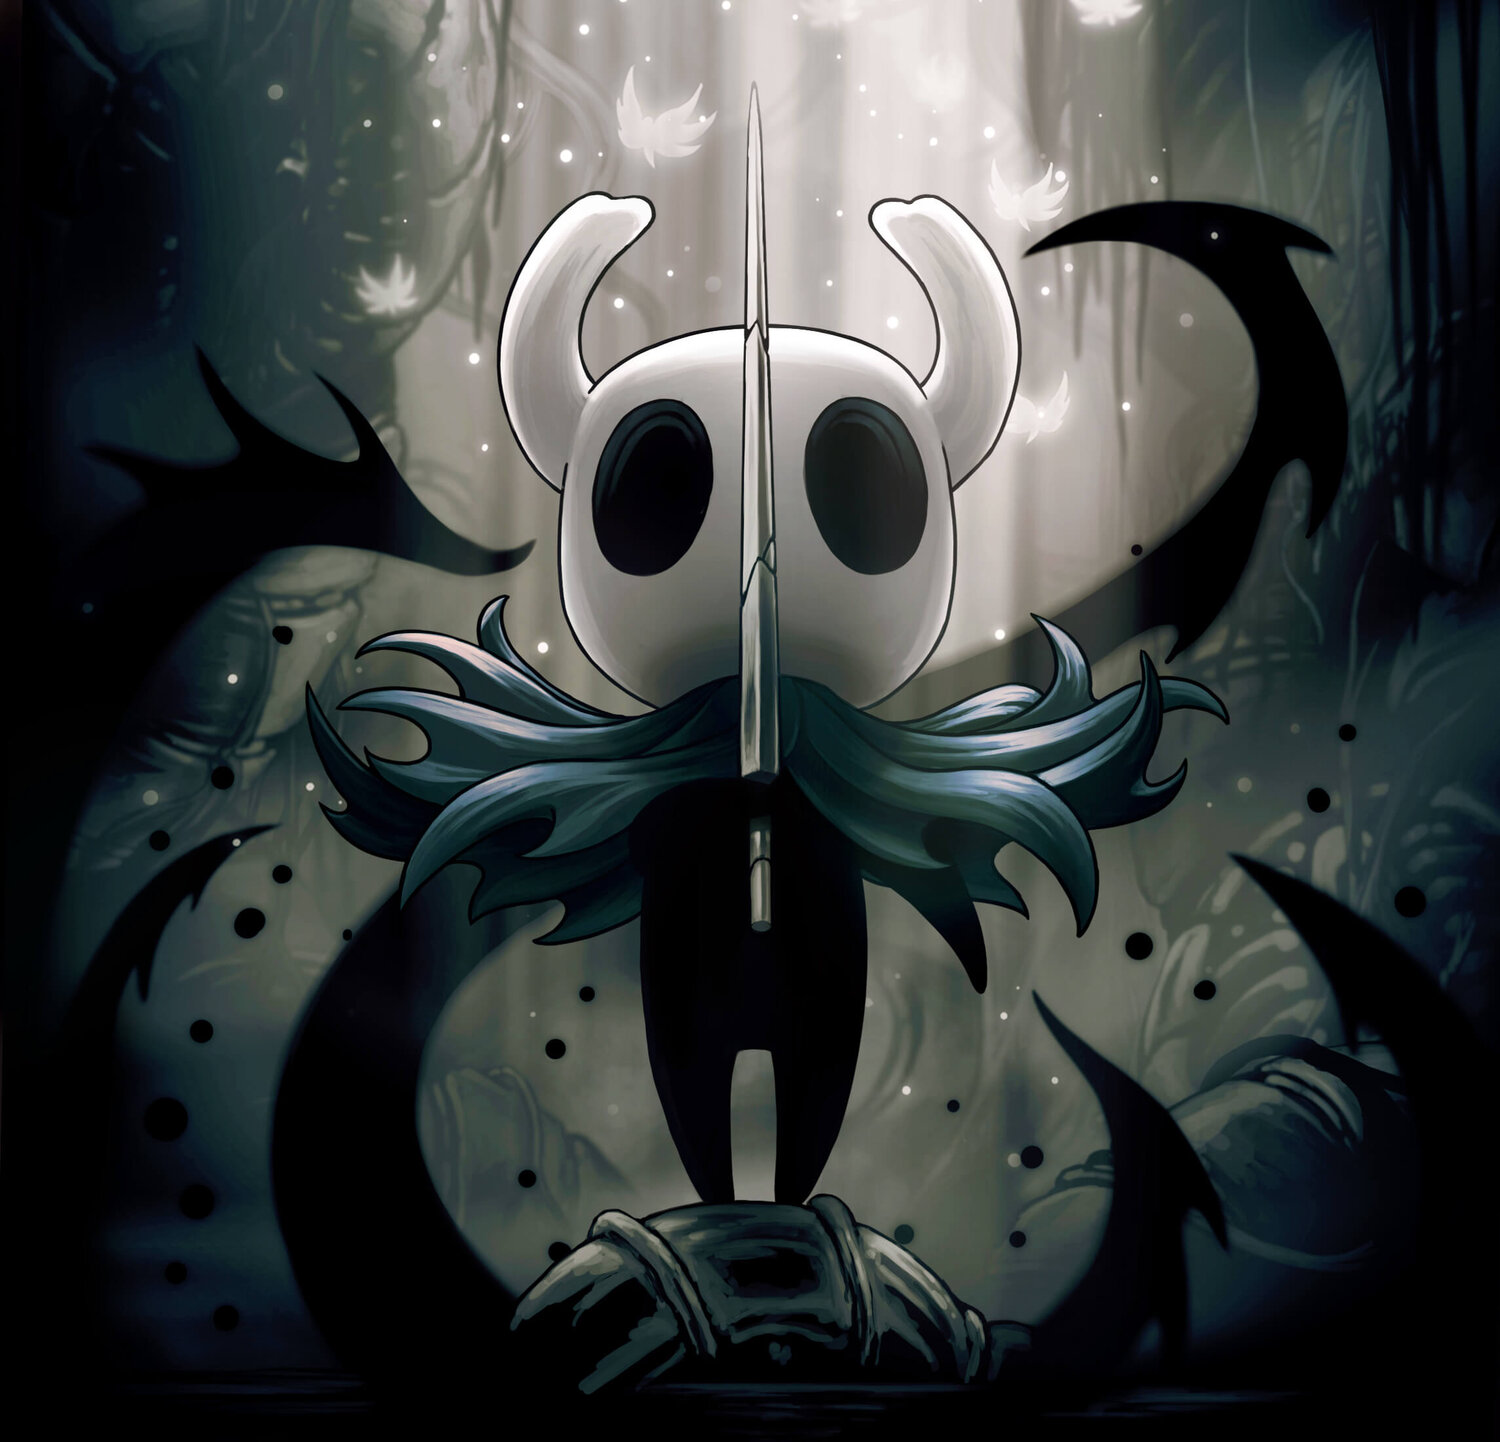 In Hollow Knight, What is the creature that appears after beating False Knight?